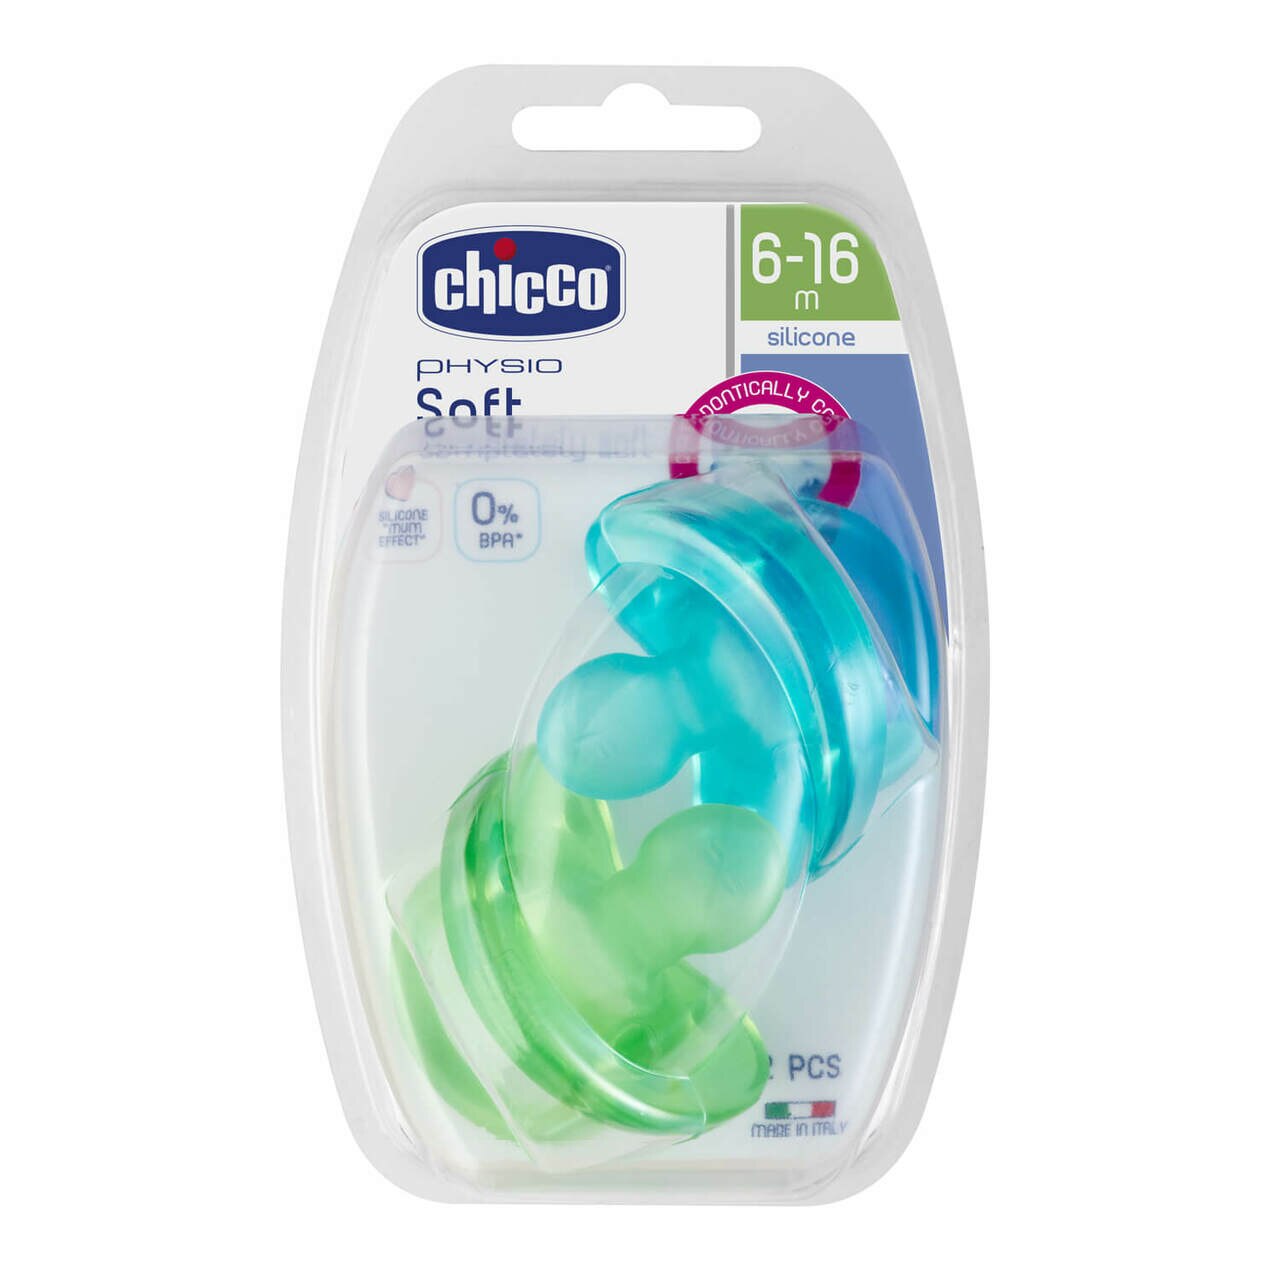 Physio Soft Soother 6-16 Months 2pk - green/blue